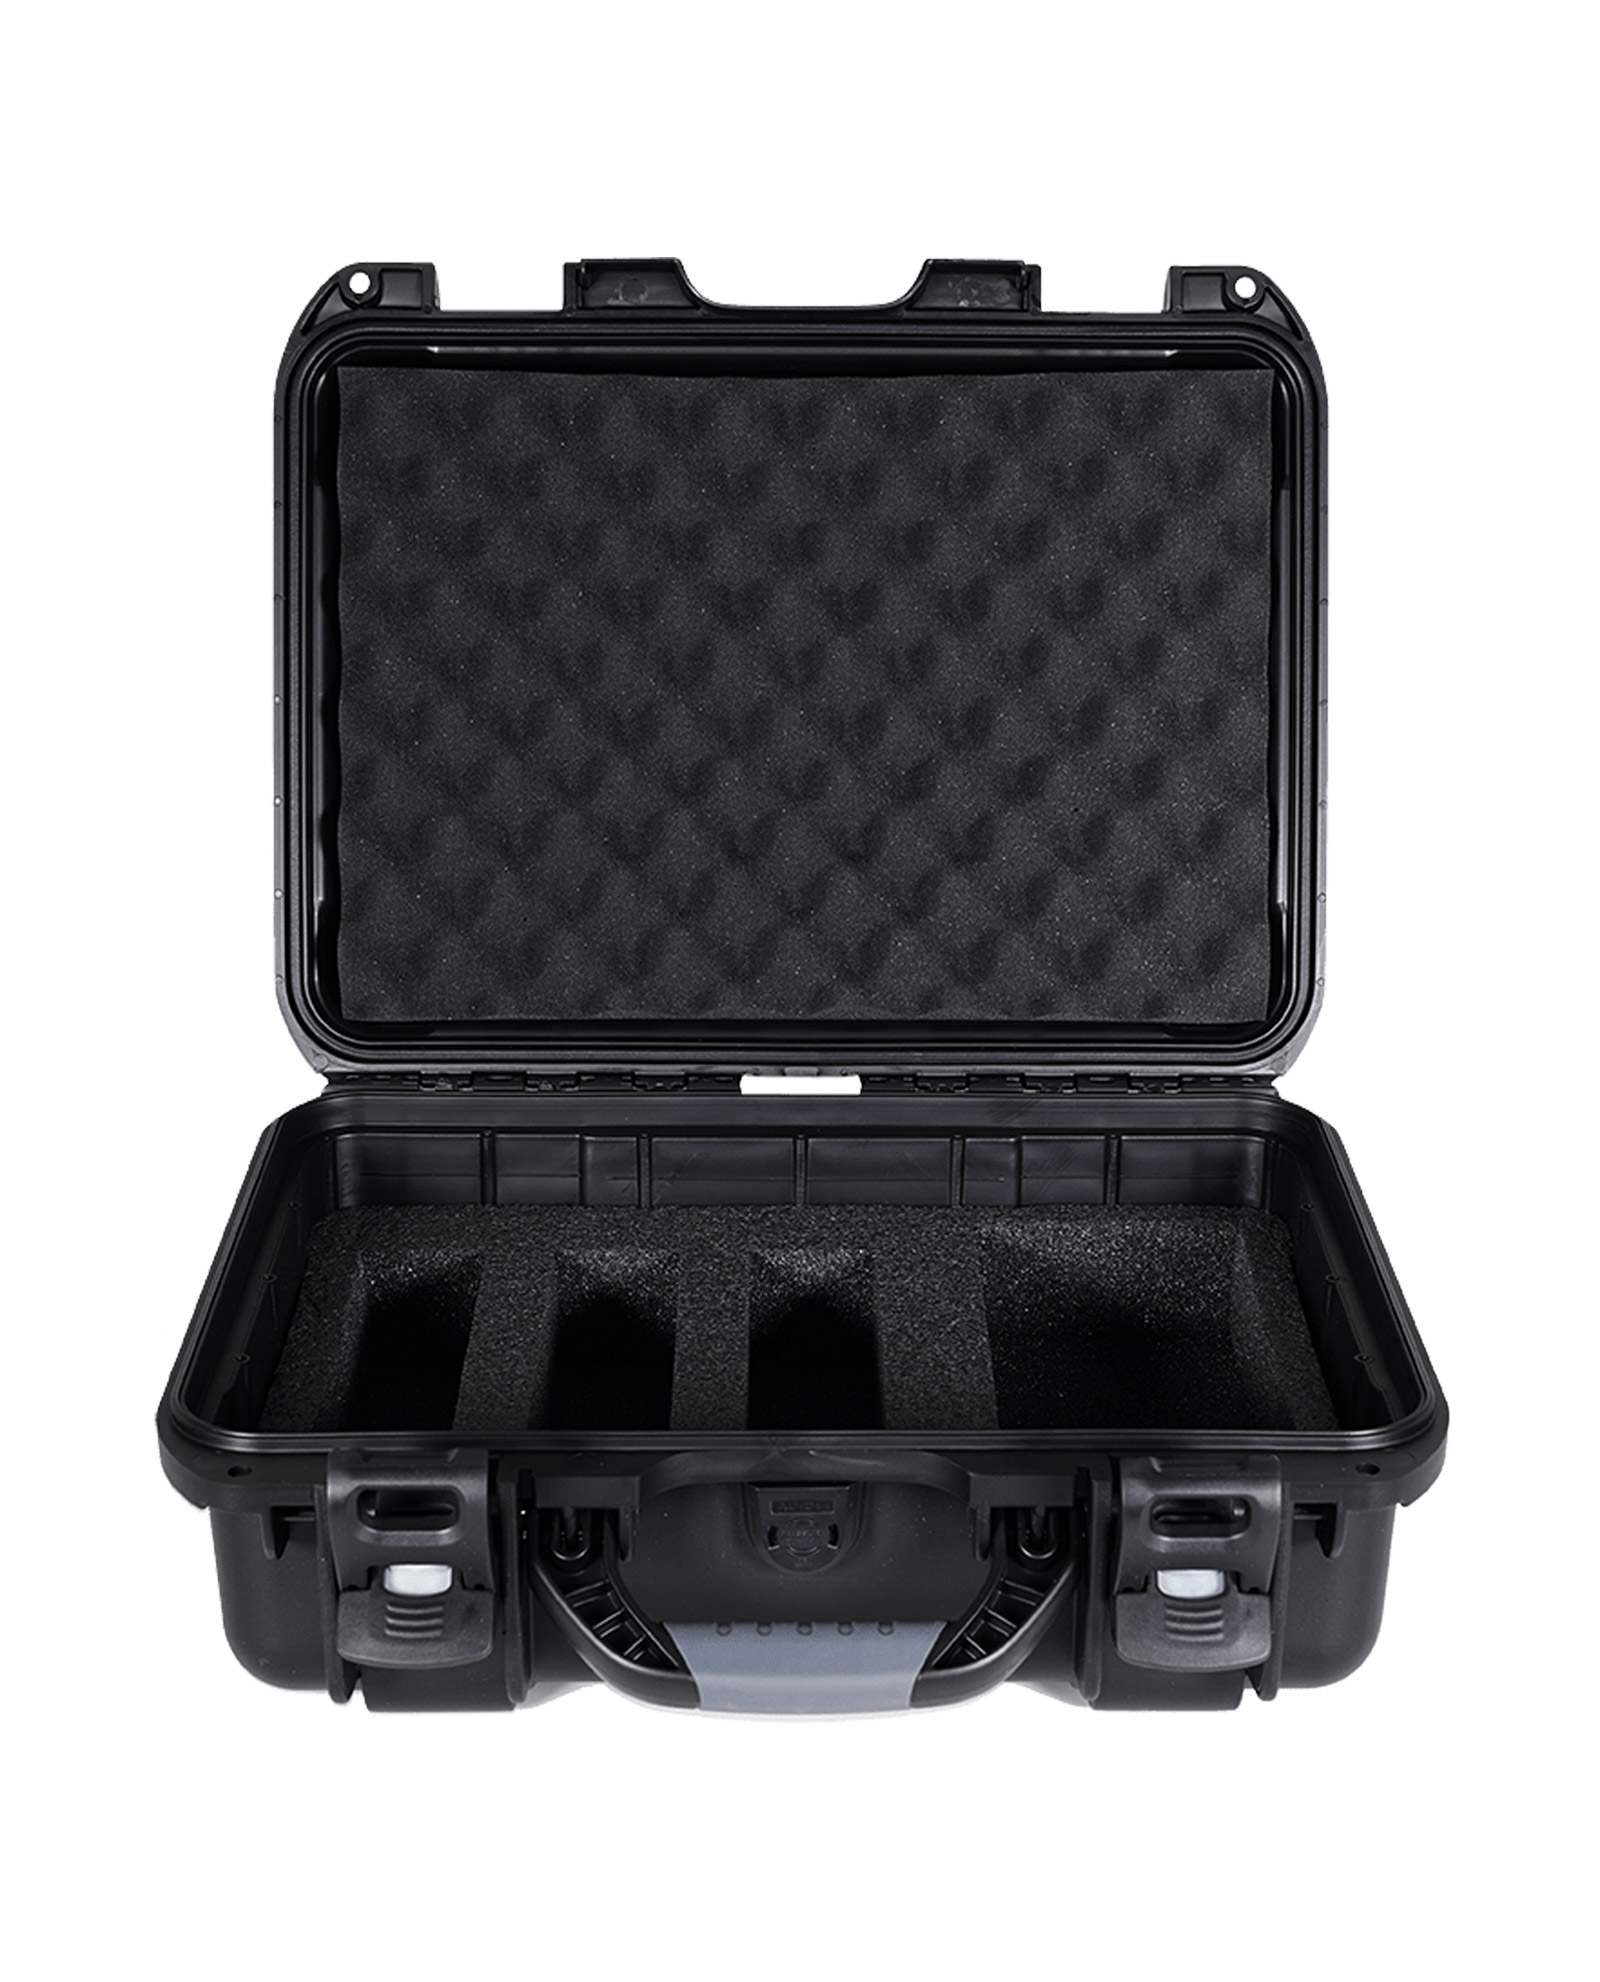 Theatrixx Xvision 3 Unit Carrying Case 1